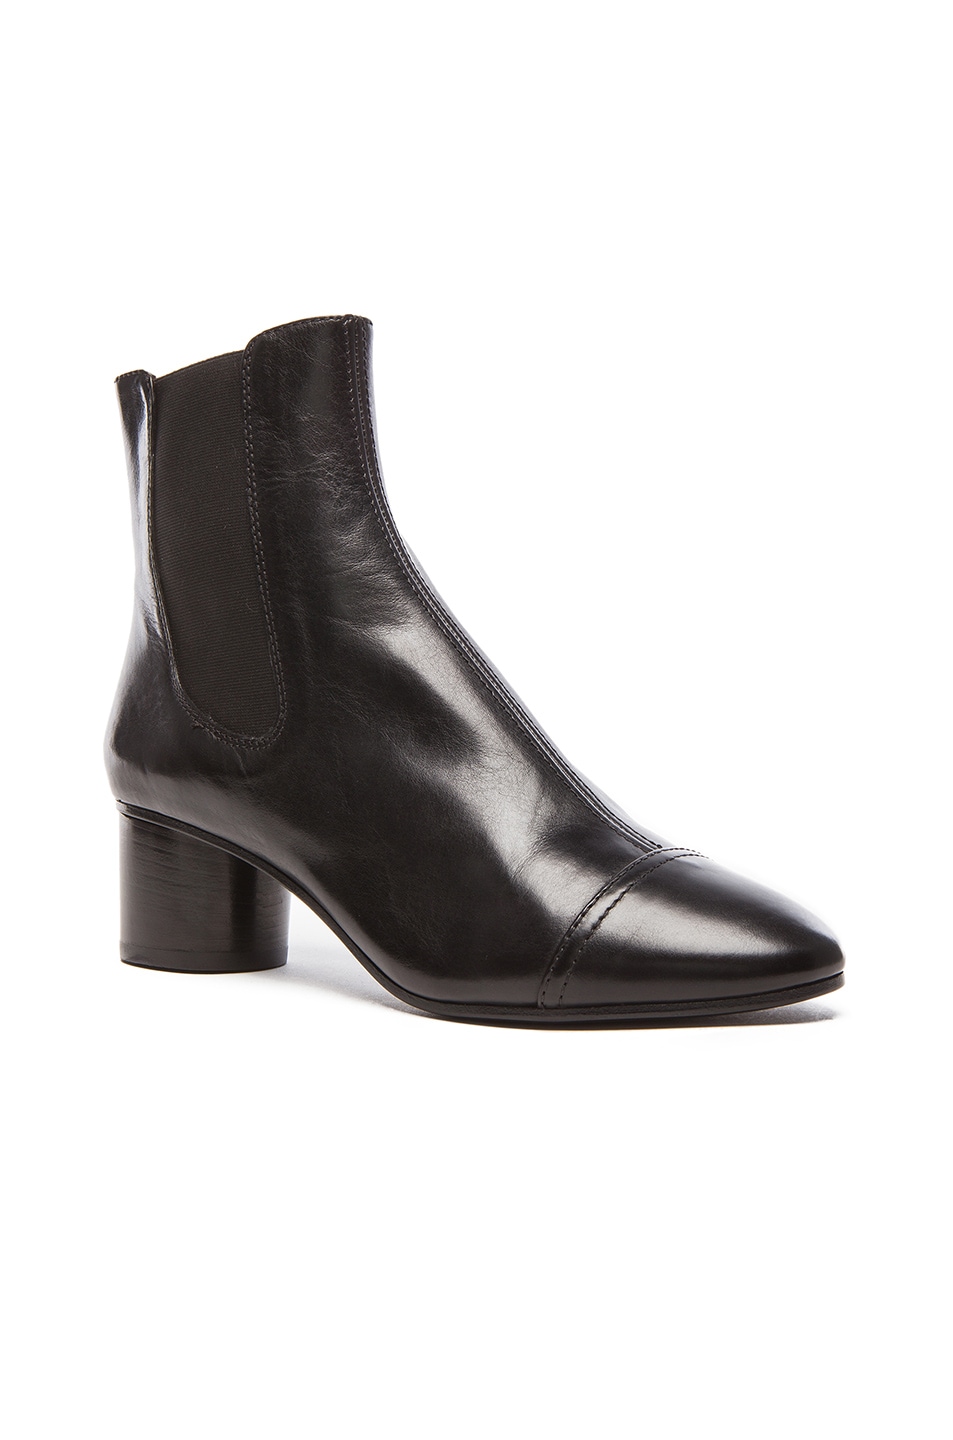 Isabel Marant Danae Chelsea Leather Boots in Black | FWRD